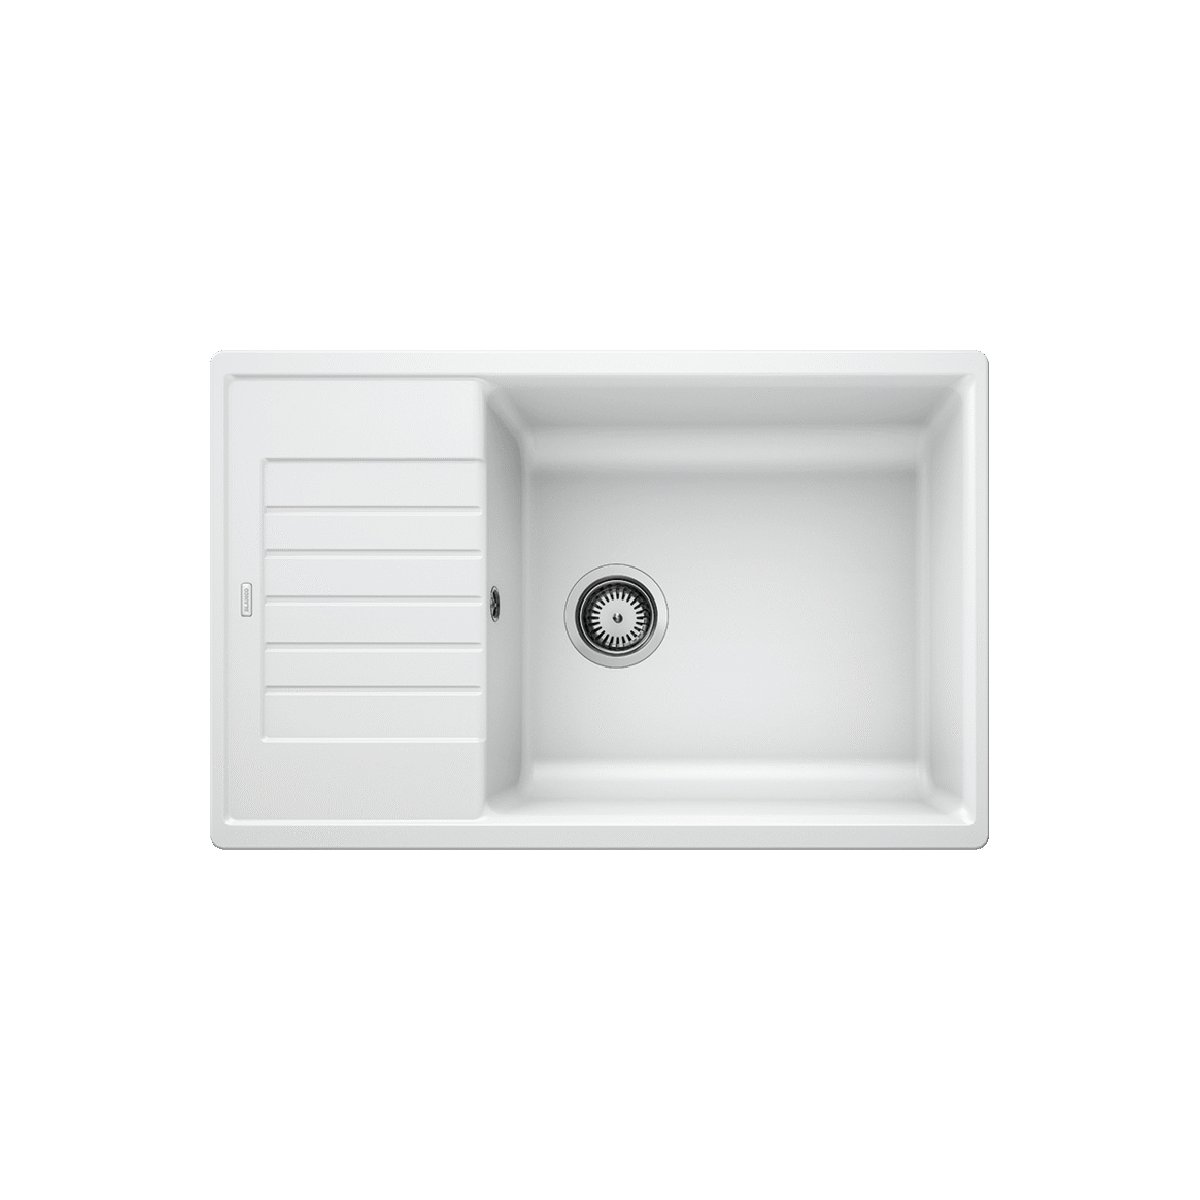 Modern White 1 Bowl Granite Kitchen Sink with Reversible Drainer 78×50 Zia XL 6 S Compact Blanco